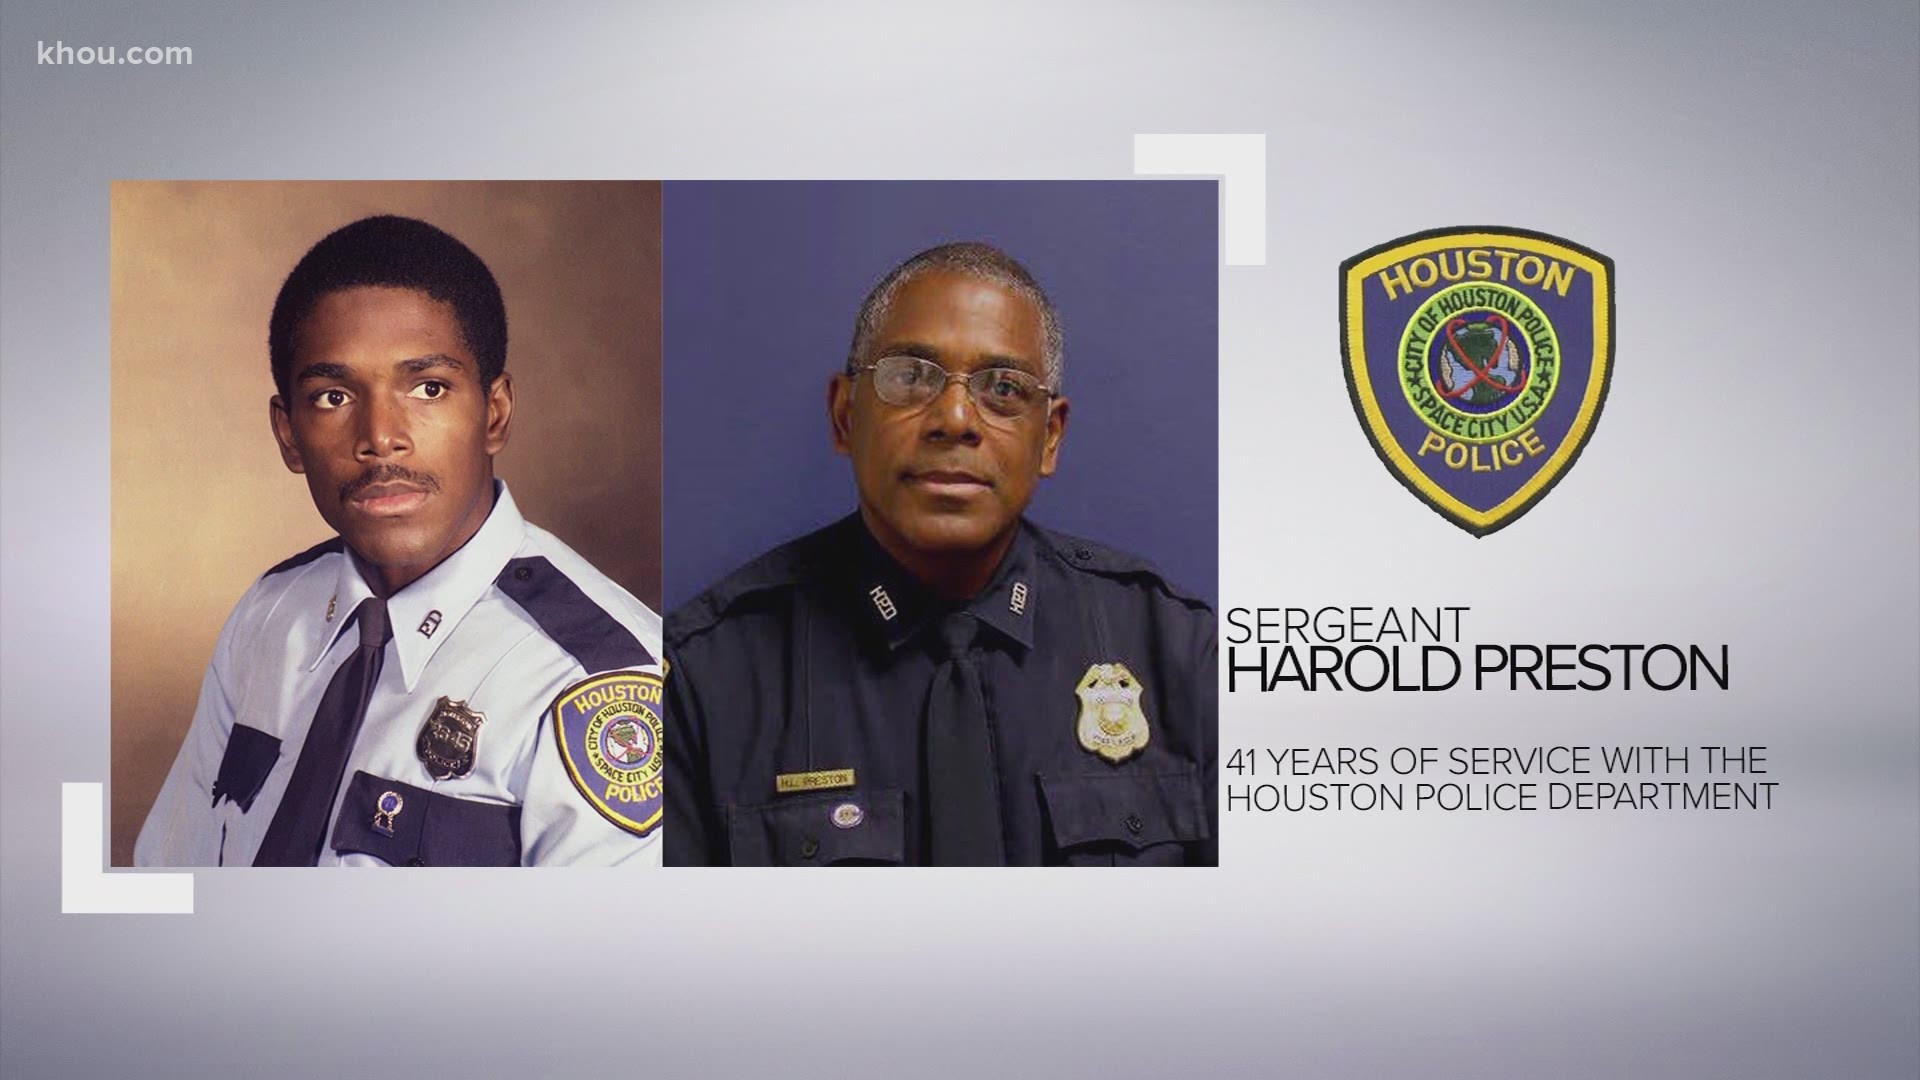 The Houston community is mourning the loss of HPD Sgt. Harold Preston who died after being shot Tuesday morning.